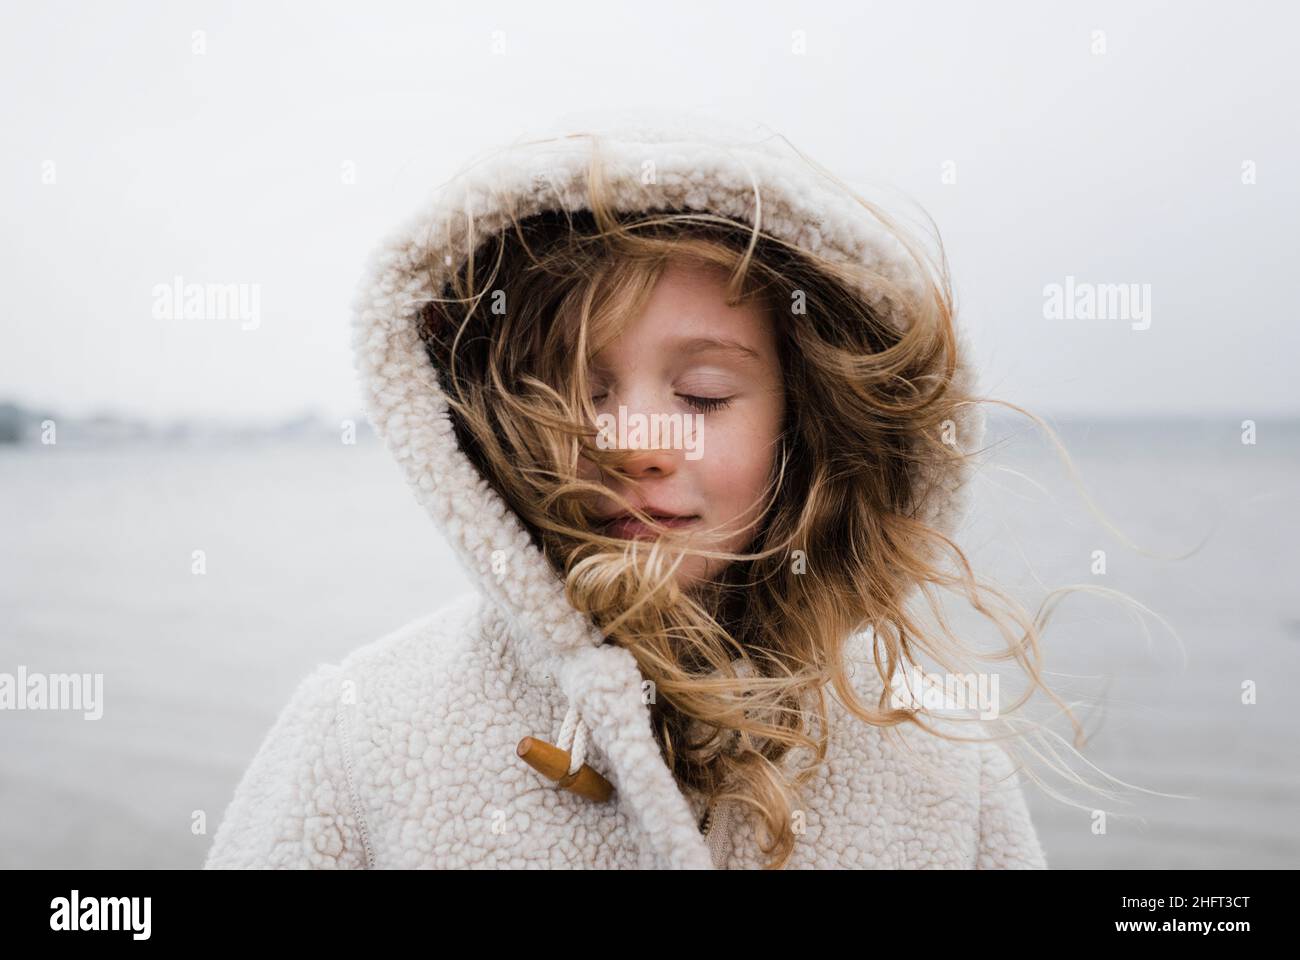 girl stood outside relaxing with her eyes closed at a windy beach Stock Photo